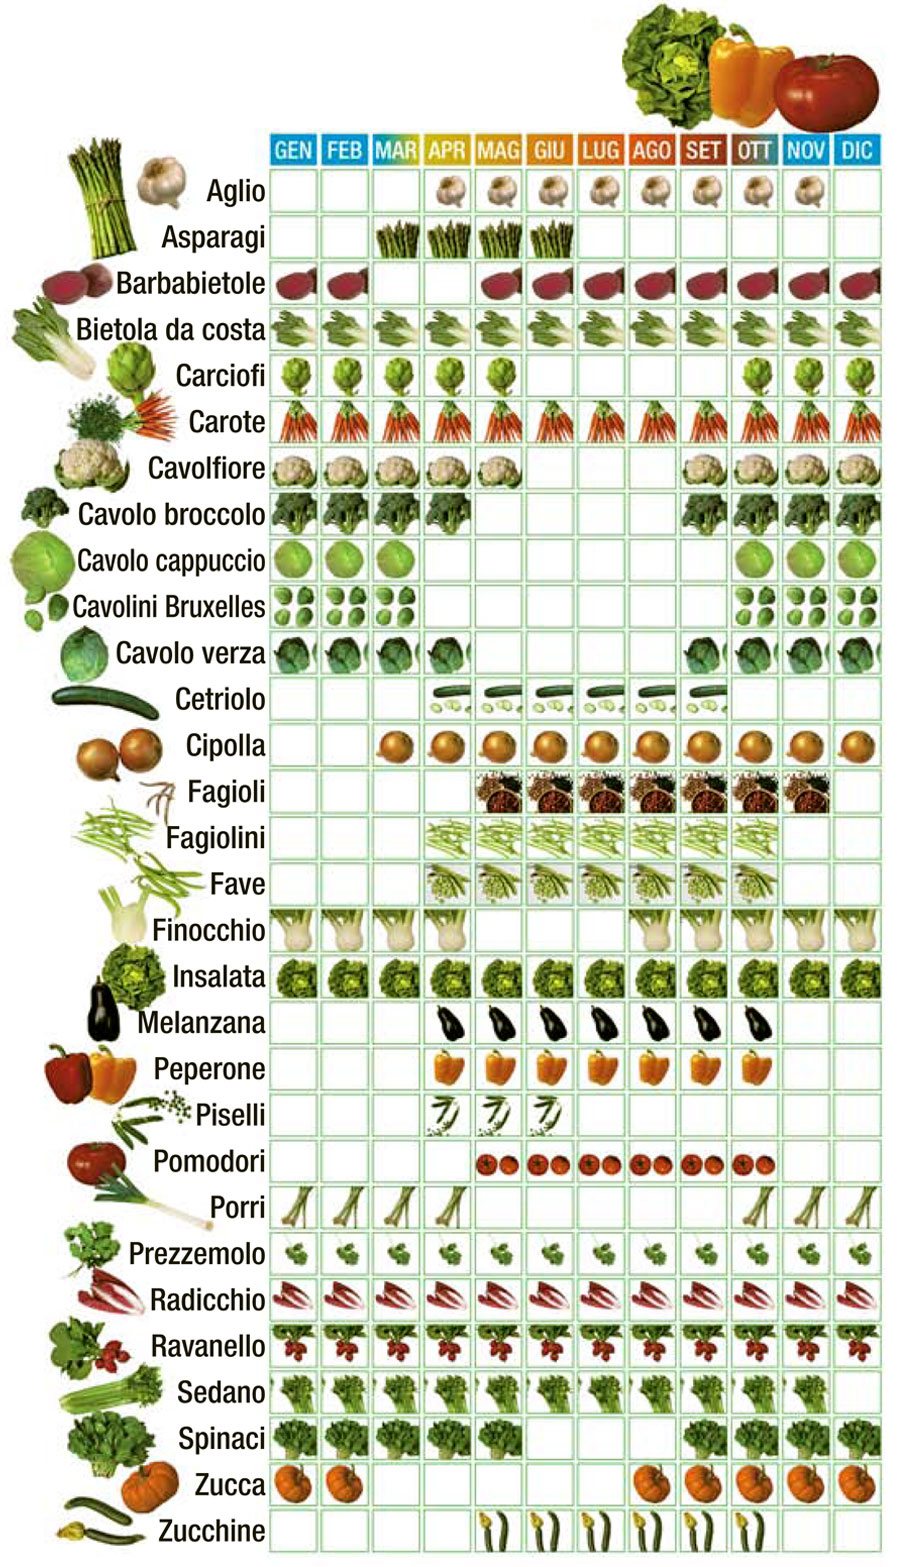 vegetable and vegetable calendar "width =" 459 "height =" 800 "srcset =" https://www.gordon-ramsay-recipes.com/wp-content/uploads/Carrots-properties-curiosities-and-useful-information-Quick-and-easy-recipe-Gordon-Ramsays-version.jpeg 900w, https: // www .sempliceveloce.it / wordpress / wp-content / uploads / 2021/12 / calendars_verdura_stagione-172x300.jpeg 172w, https://www.sempliceveloce.it/wordpress/wp-content/uploads/2021/12/calendario_verdura_stagione-588x1024. jpeg 588w, https://www.sempliceveloce.it/wordpress/wp-content/uploads/2021/12/calendario_verdura_stagione-768x1337.jpeg 768w, https://www.sempliceveloce.it/wordpress/wp-content/uploads/ 2021/12 / calendars_verdura_stagione-882x1536.jpeg 882w, https://www.sempliceveloce.it/wordpress/wp-content/uploads/2021/12/calendario_verdura_stagione-241x420.jpeg 241w, https://www.sempliceveloce.it/ wordpress / wp-content / uploads / 2021/12 / calendars_verdura_stagione-640x1114.jpeg 640w, https://www.sempliceveloce.it/wordpress/wp-content/uploads/2021/12/calendario_verdura_stagione-681x1186.jpeg 681w "sizes = "(max-width: 459px) 10 0vw, 459px